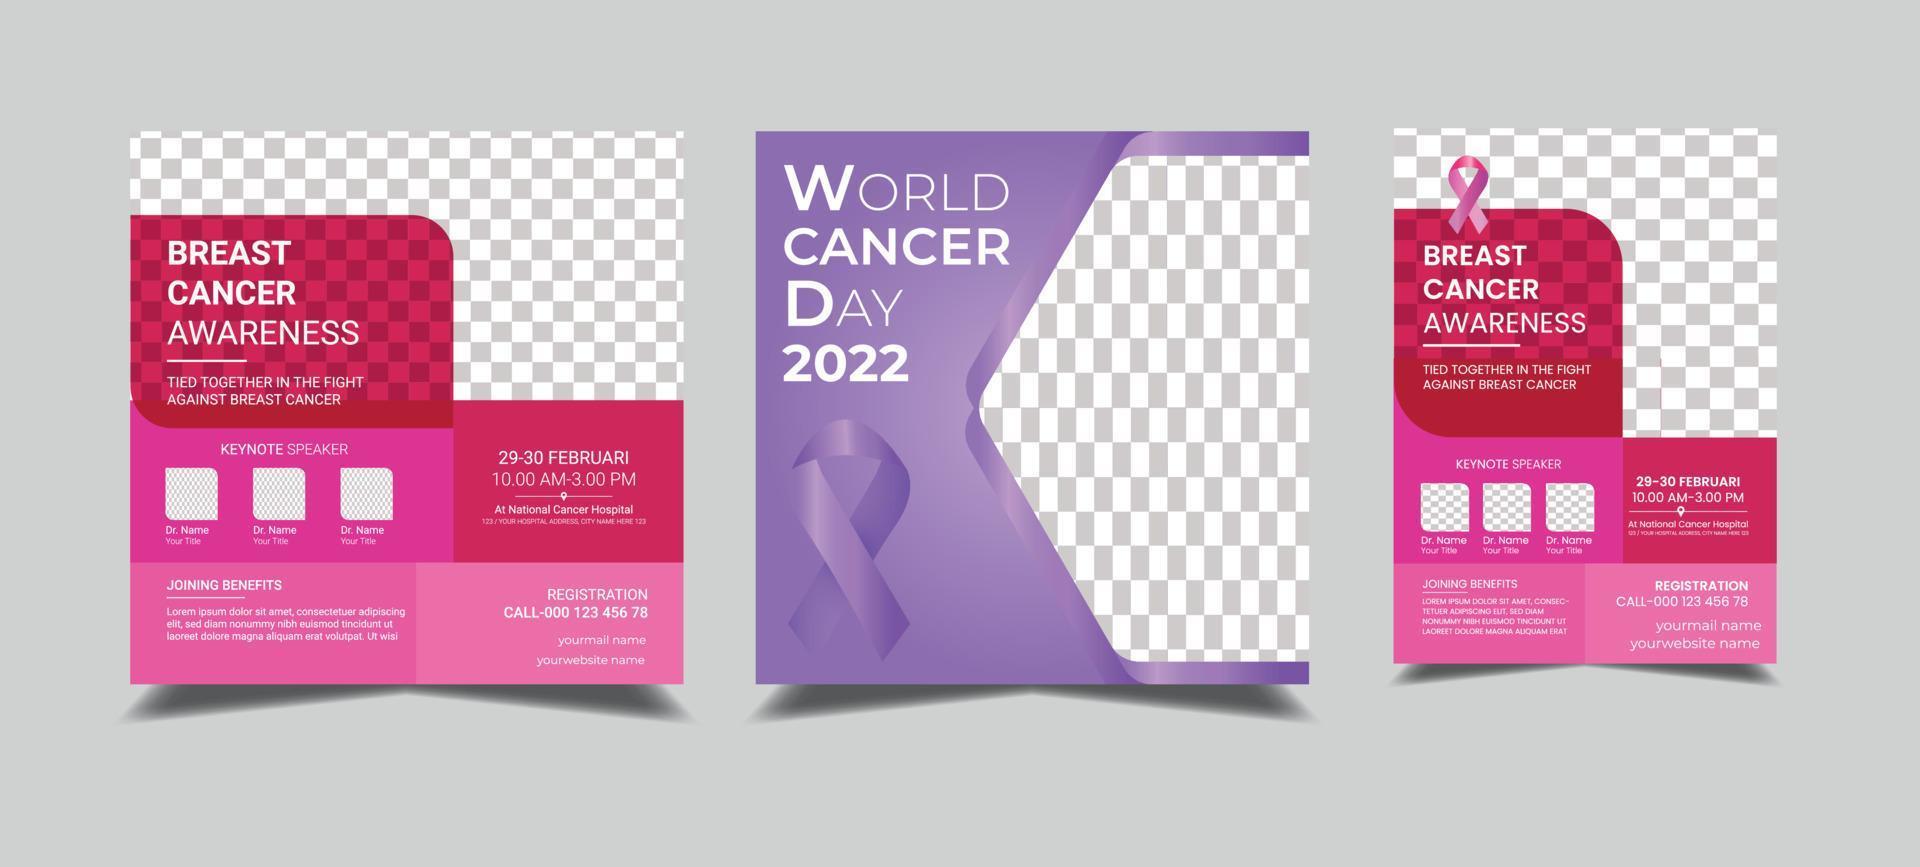 world cancer day web banner and flyer vector